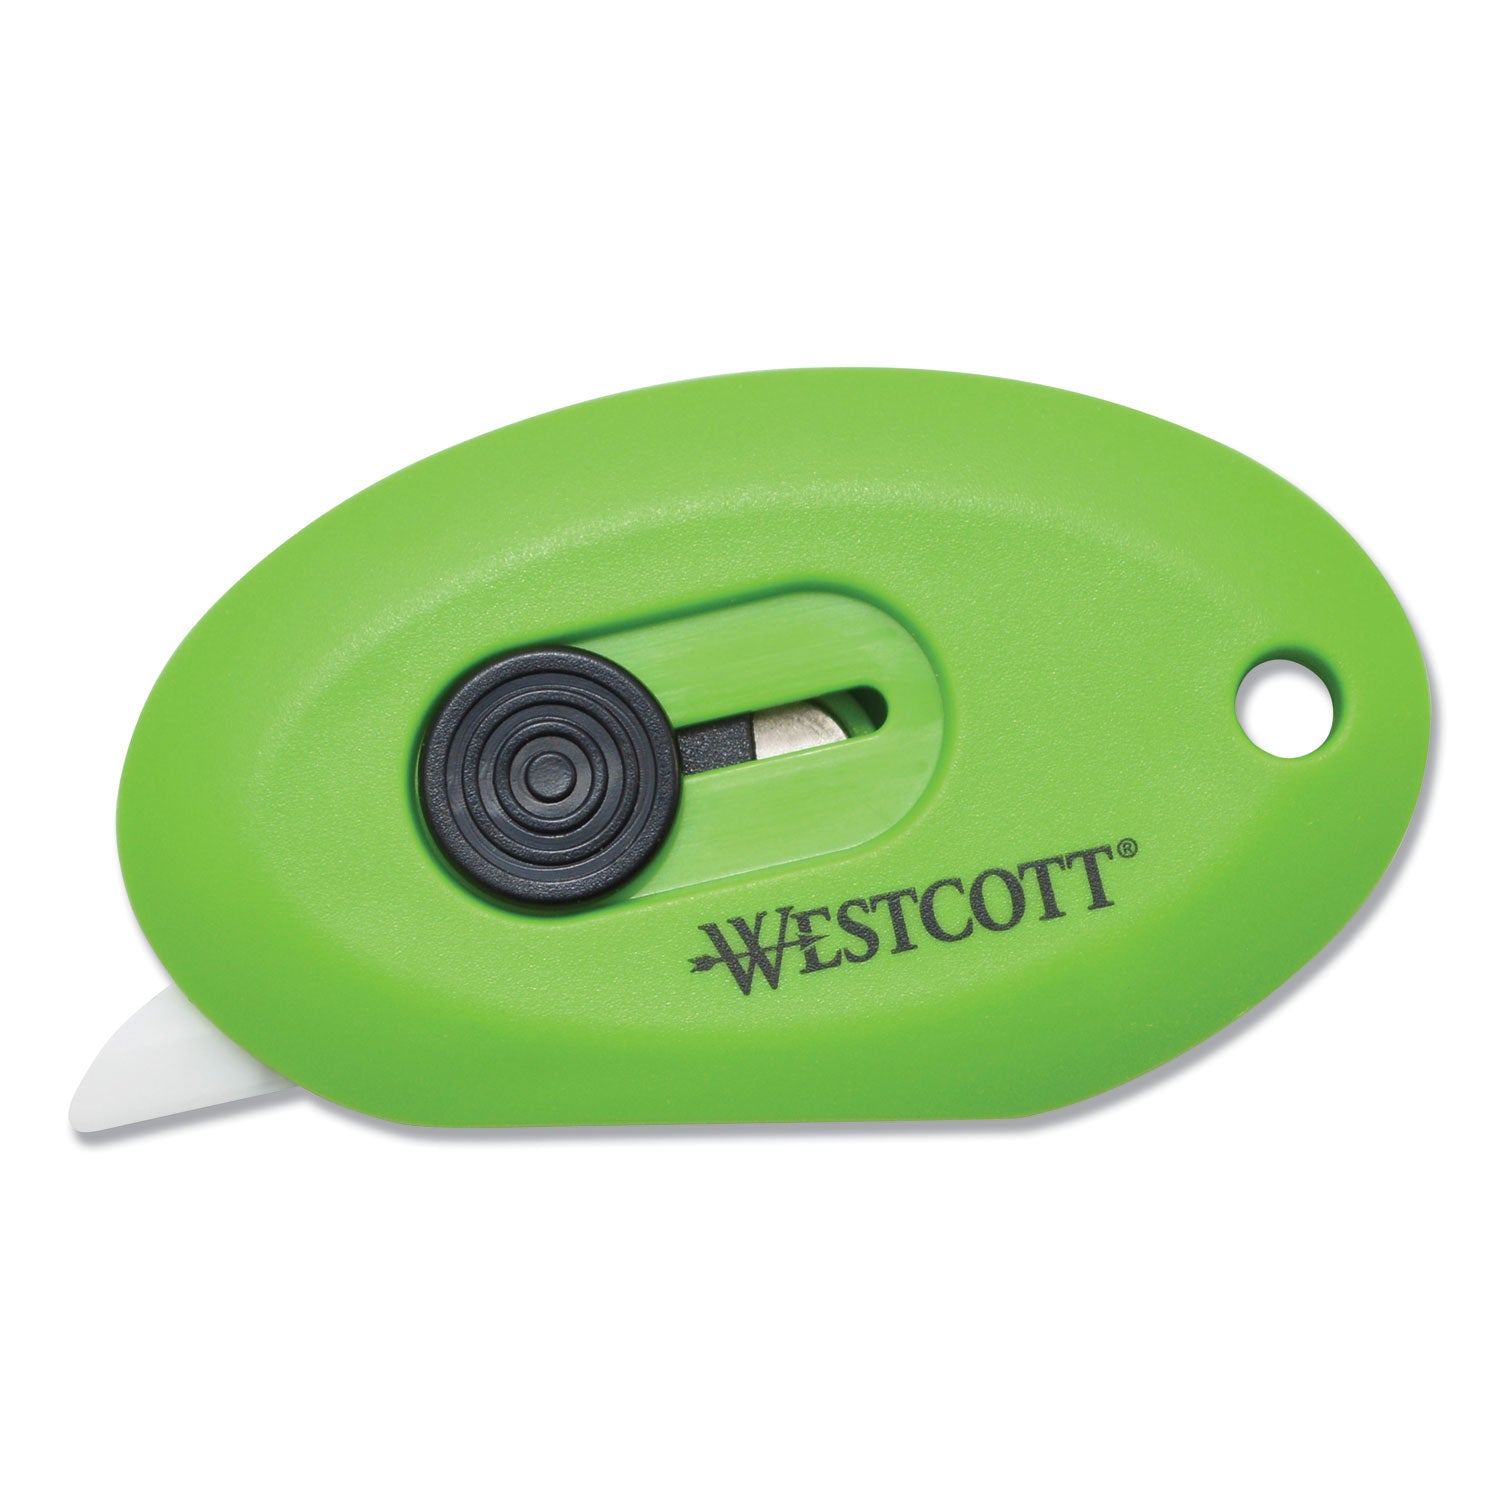 compact-safety-ceramic-blade-box-cutter-retractable-blade-05-blade-25-plastic-handle-green_acm16474 - 1